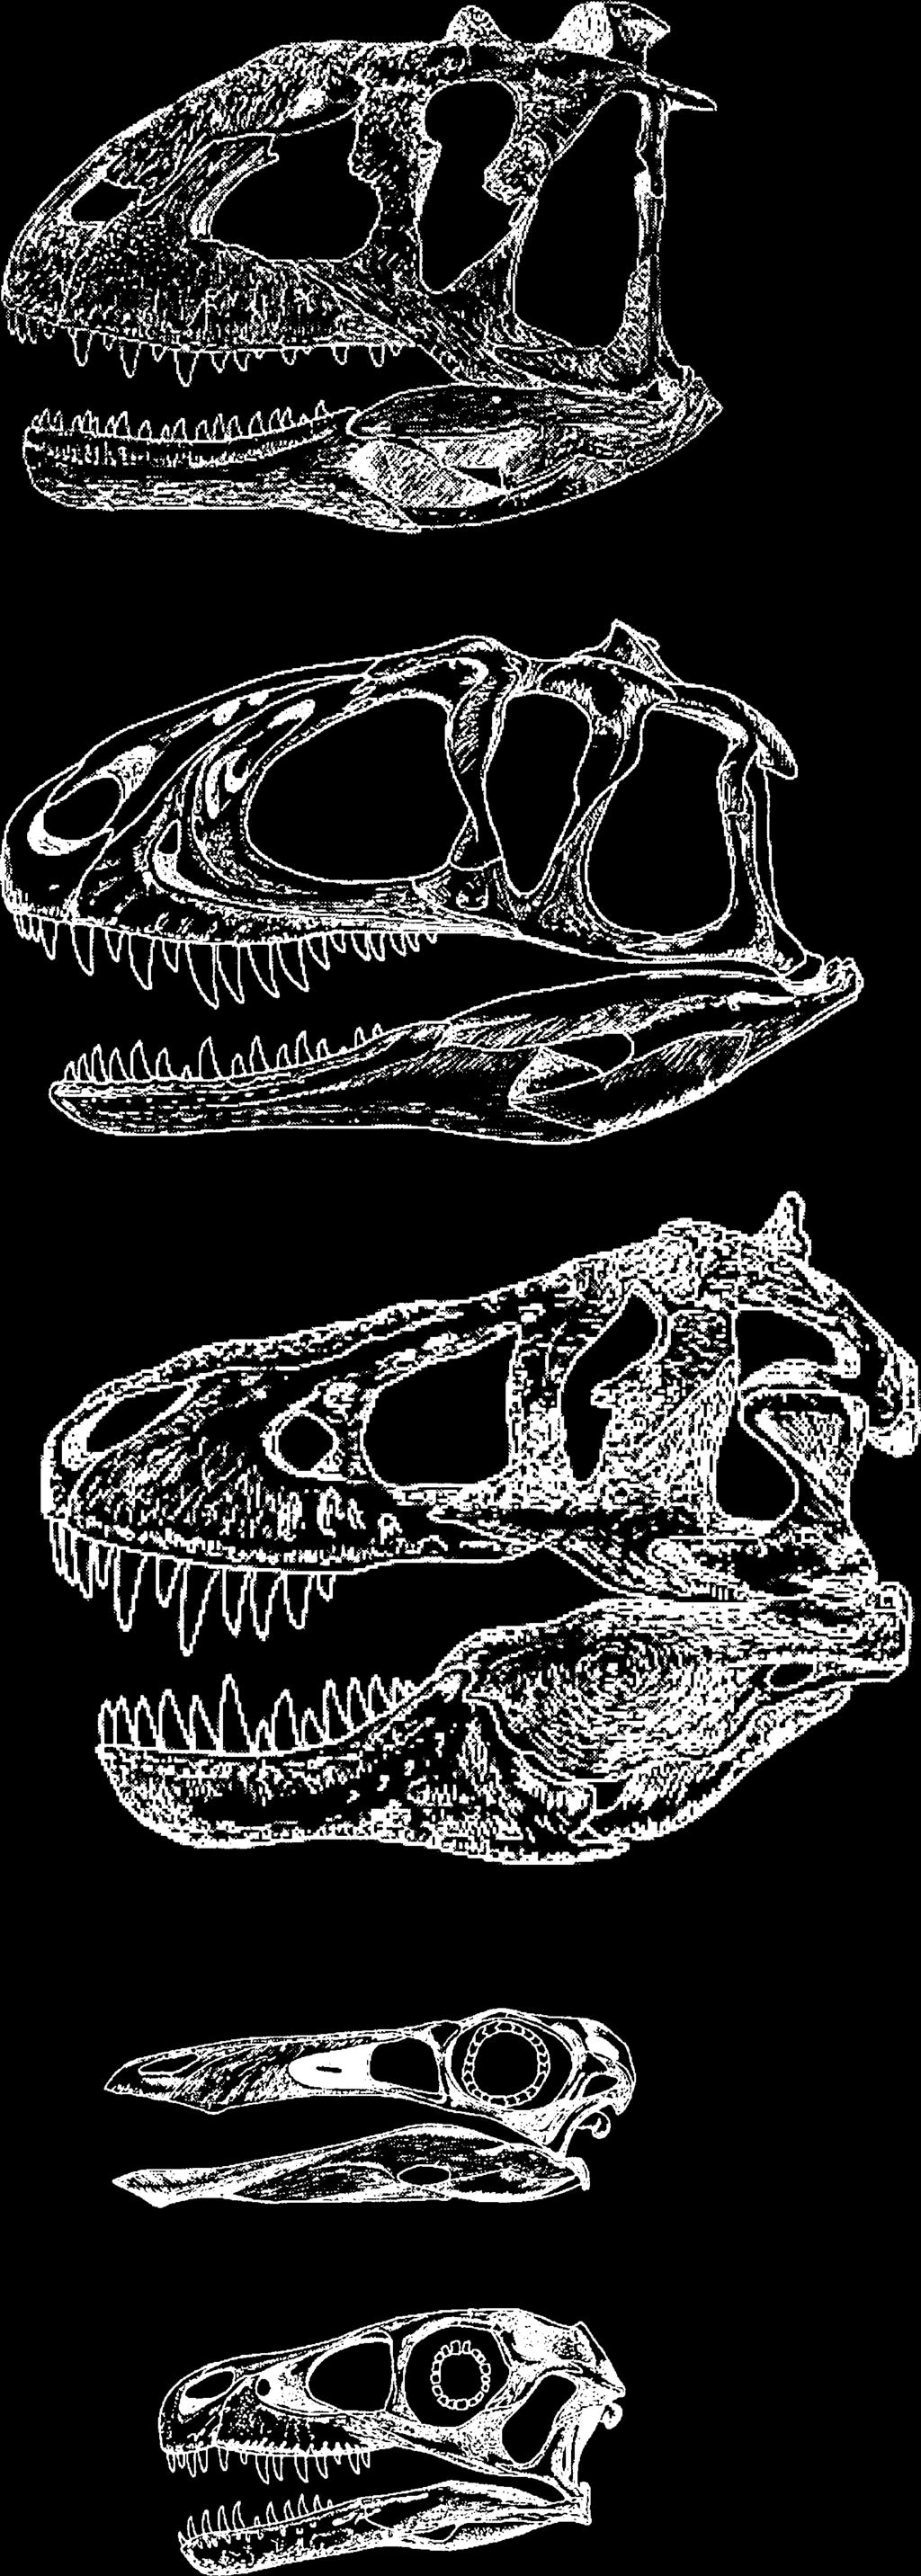 bone. Because of the close relationship between birds and other coelurosaurs, and because of the possible need for an insulating integument in these possibly endothermic ( warm blooded ) animals, it